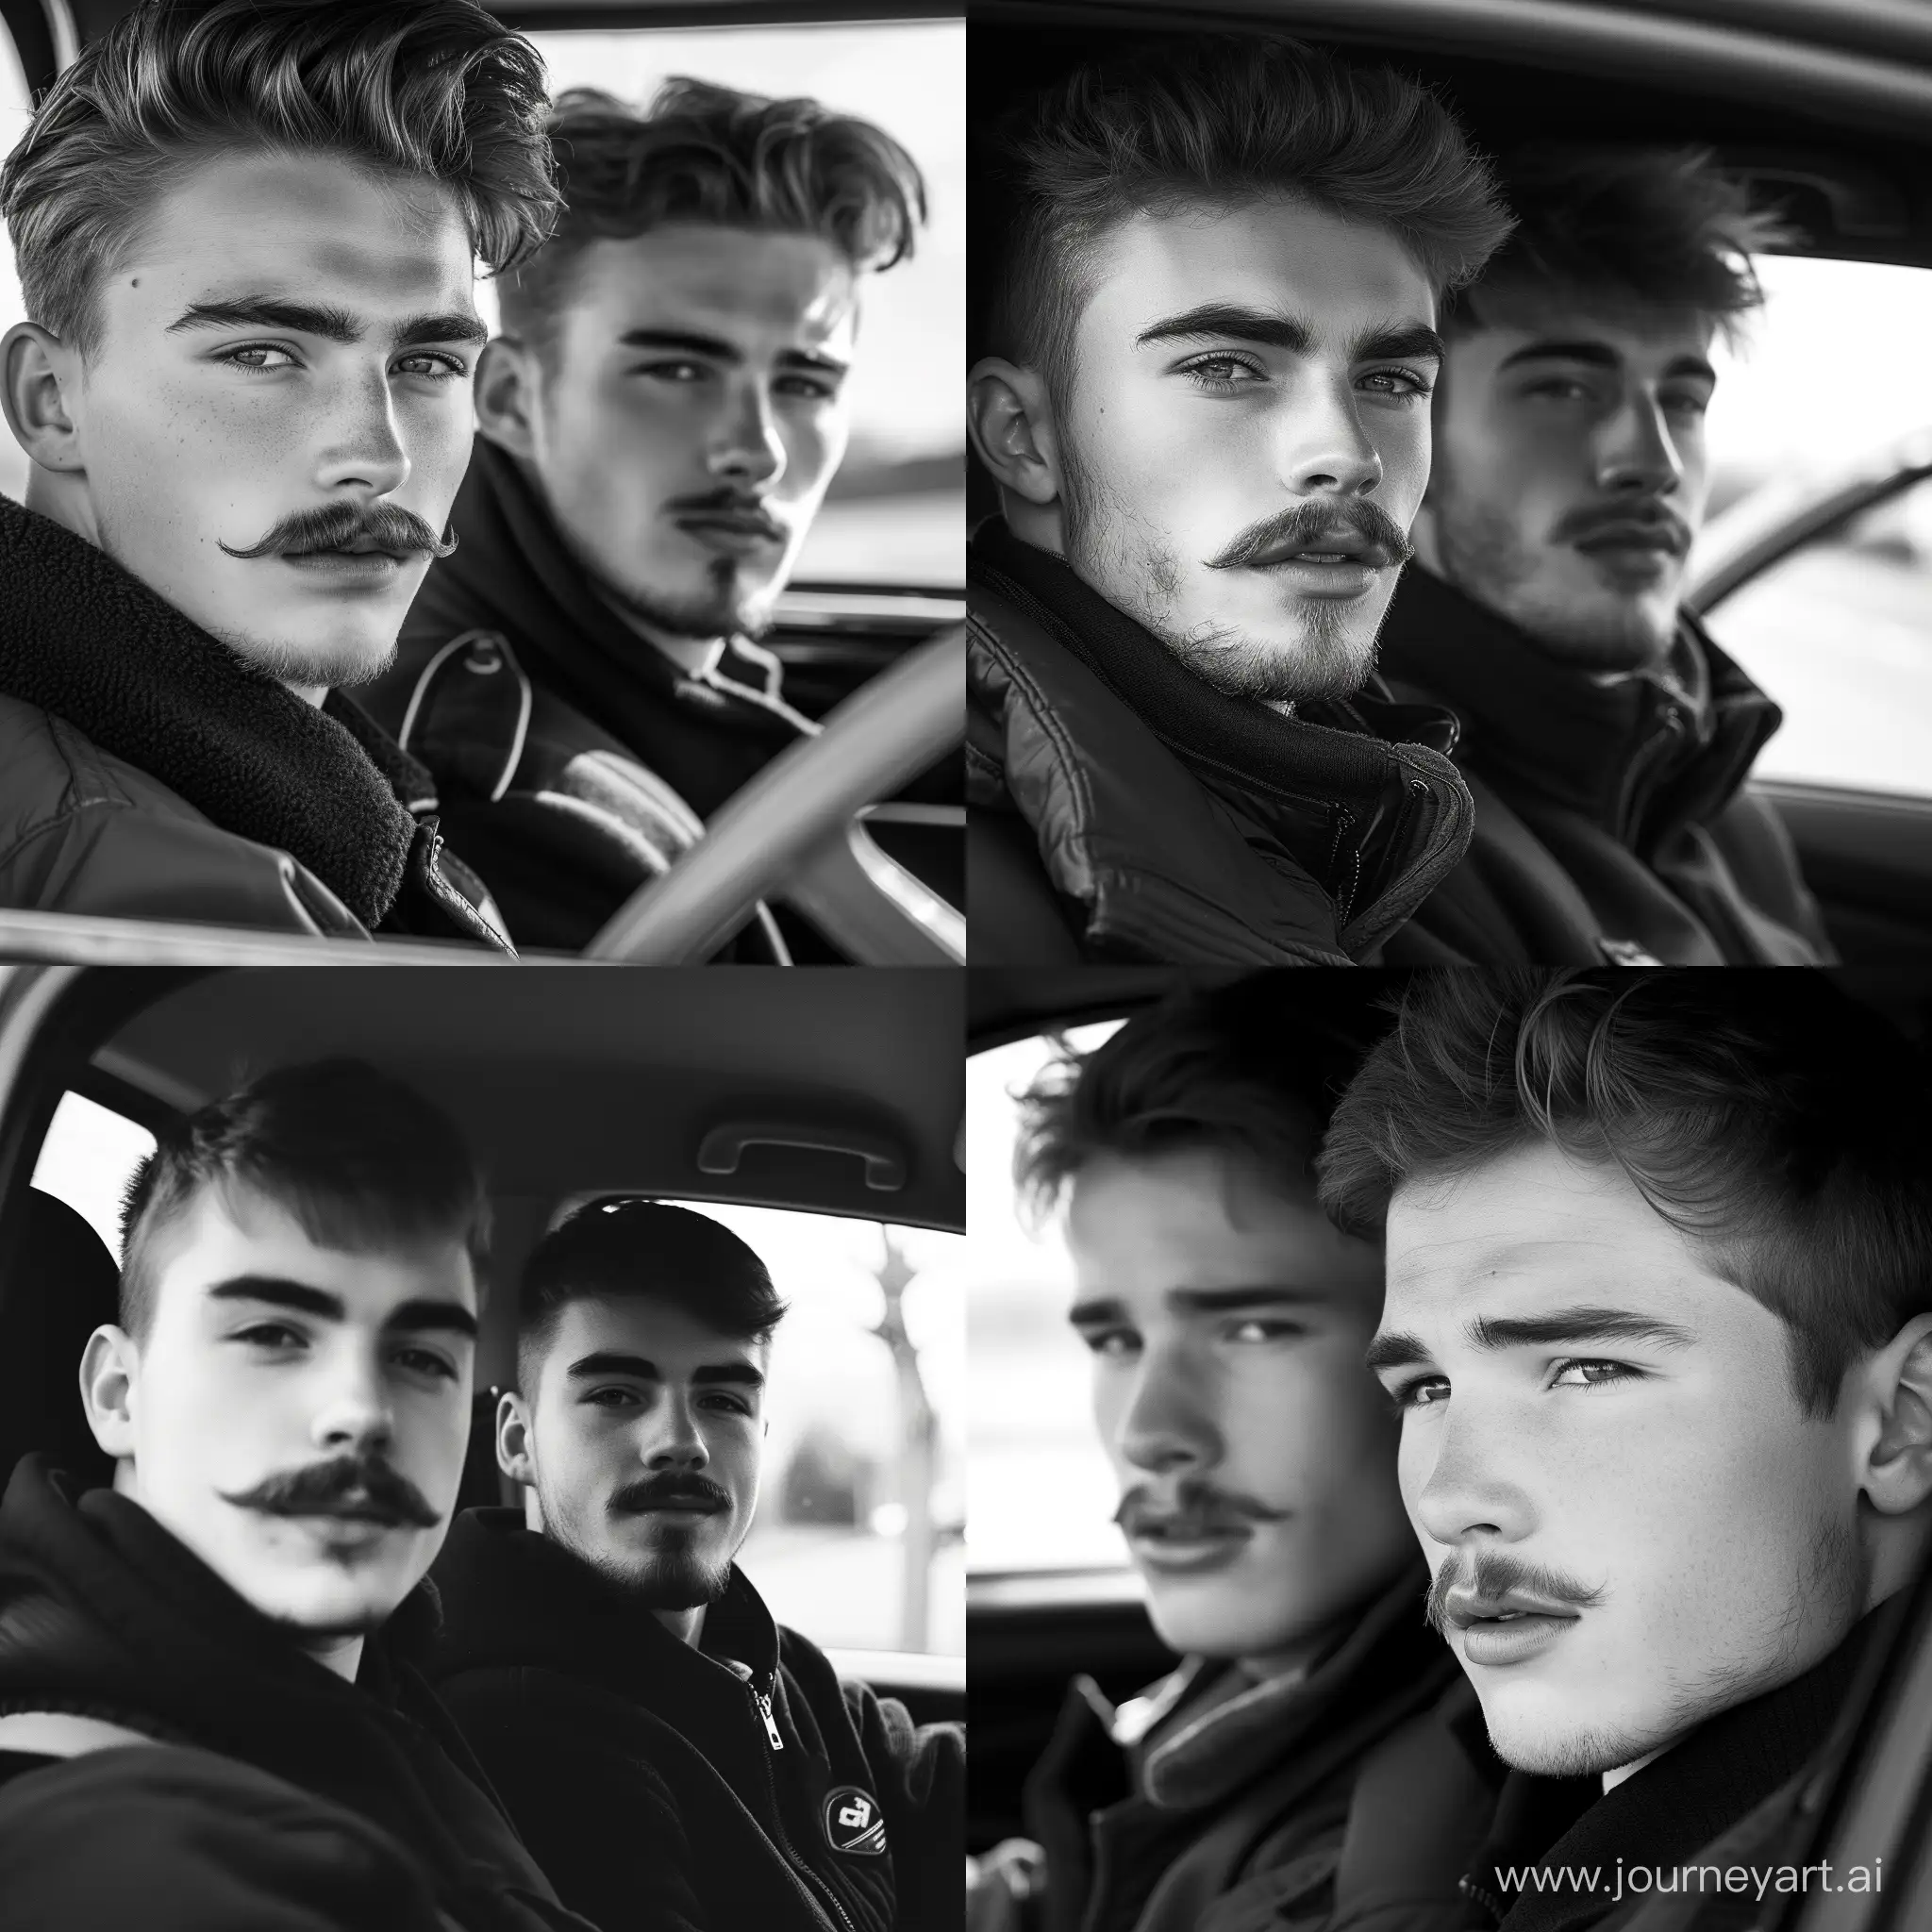 Stylish-Gentlemen-on-a-Drive-with-Distinct-Facial-Hair